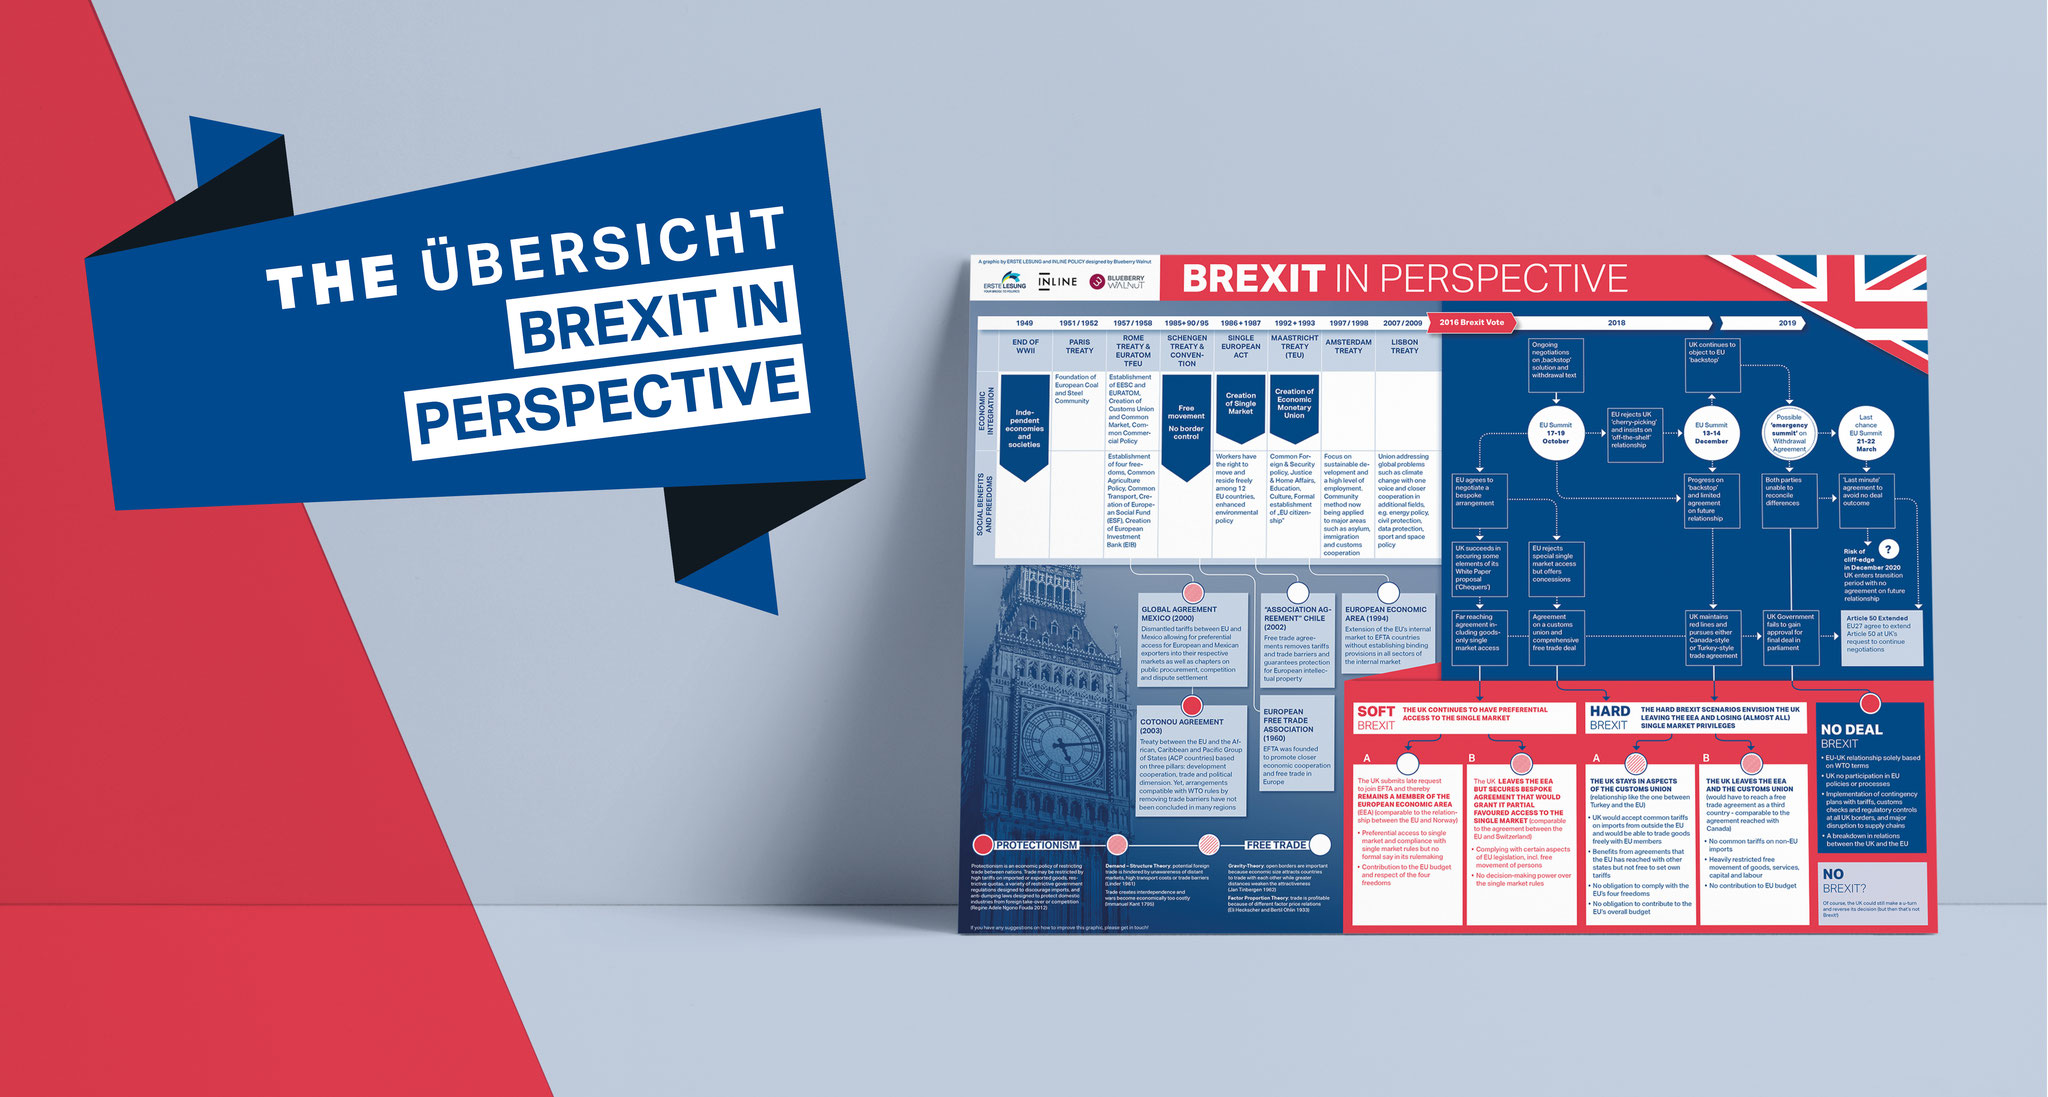 Download: Brexit in perspective (eng)